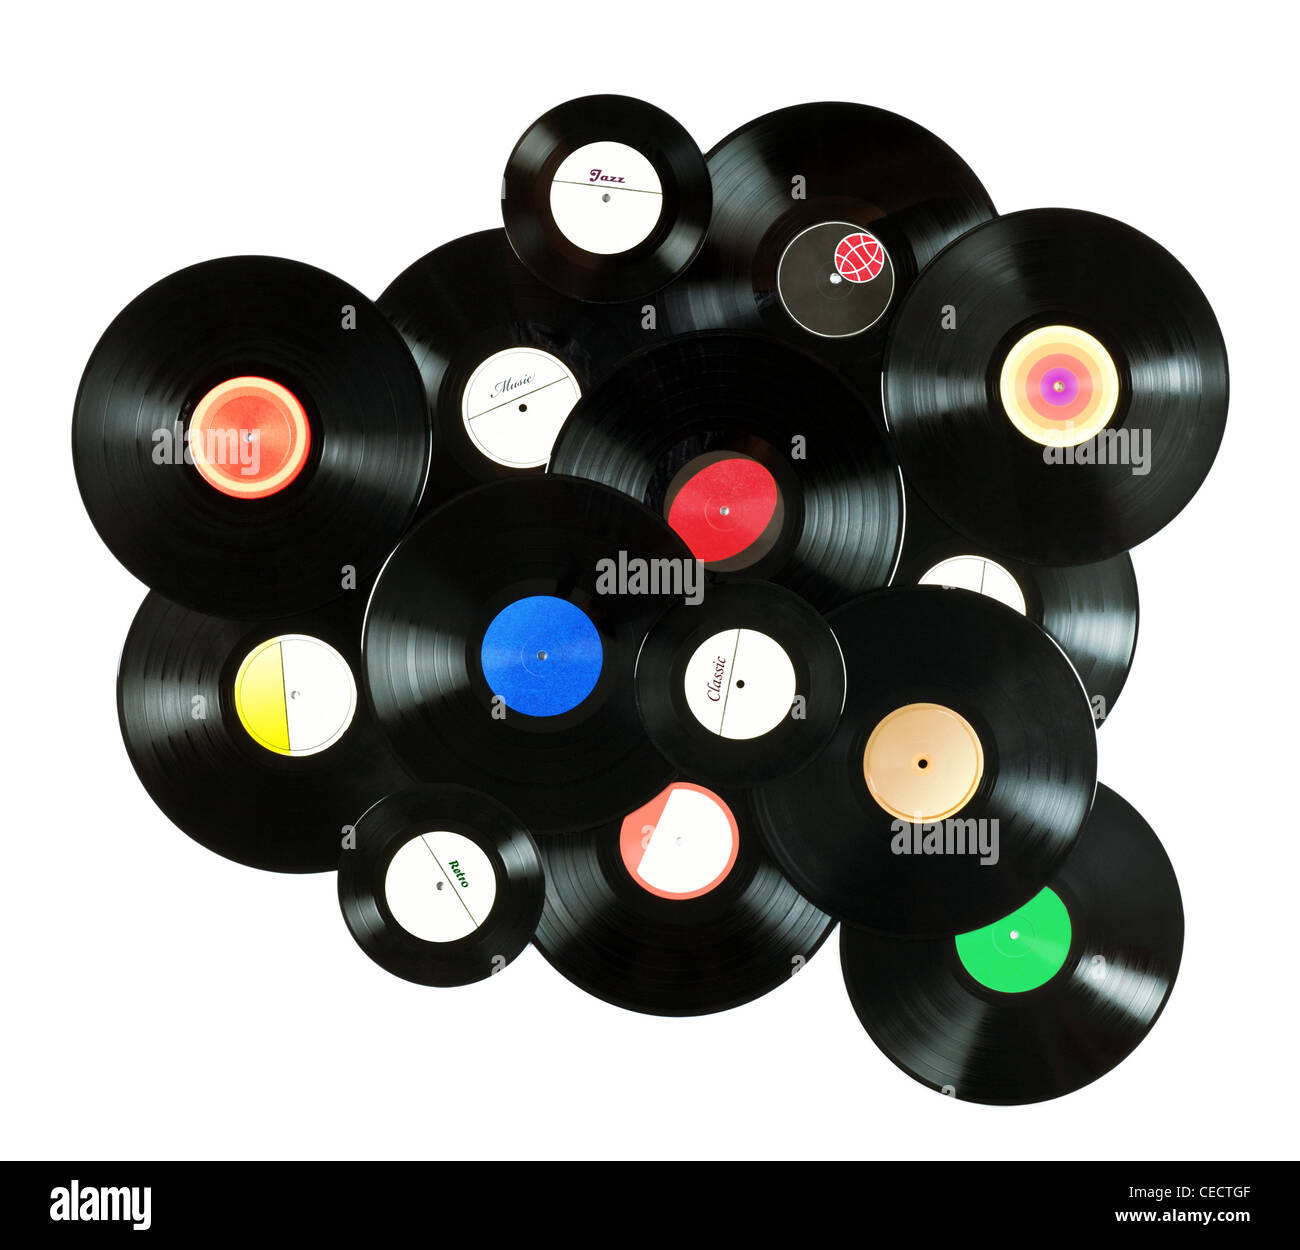 Abstract music colorful background made of vintage vinyl records, isolated over white background, all labels designed by myself Stock Photo